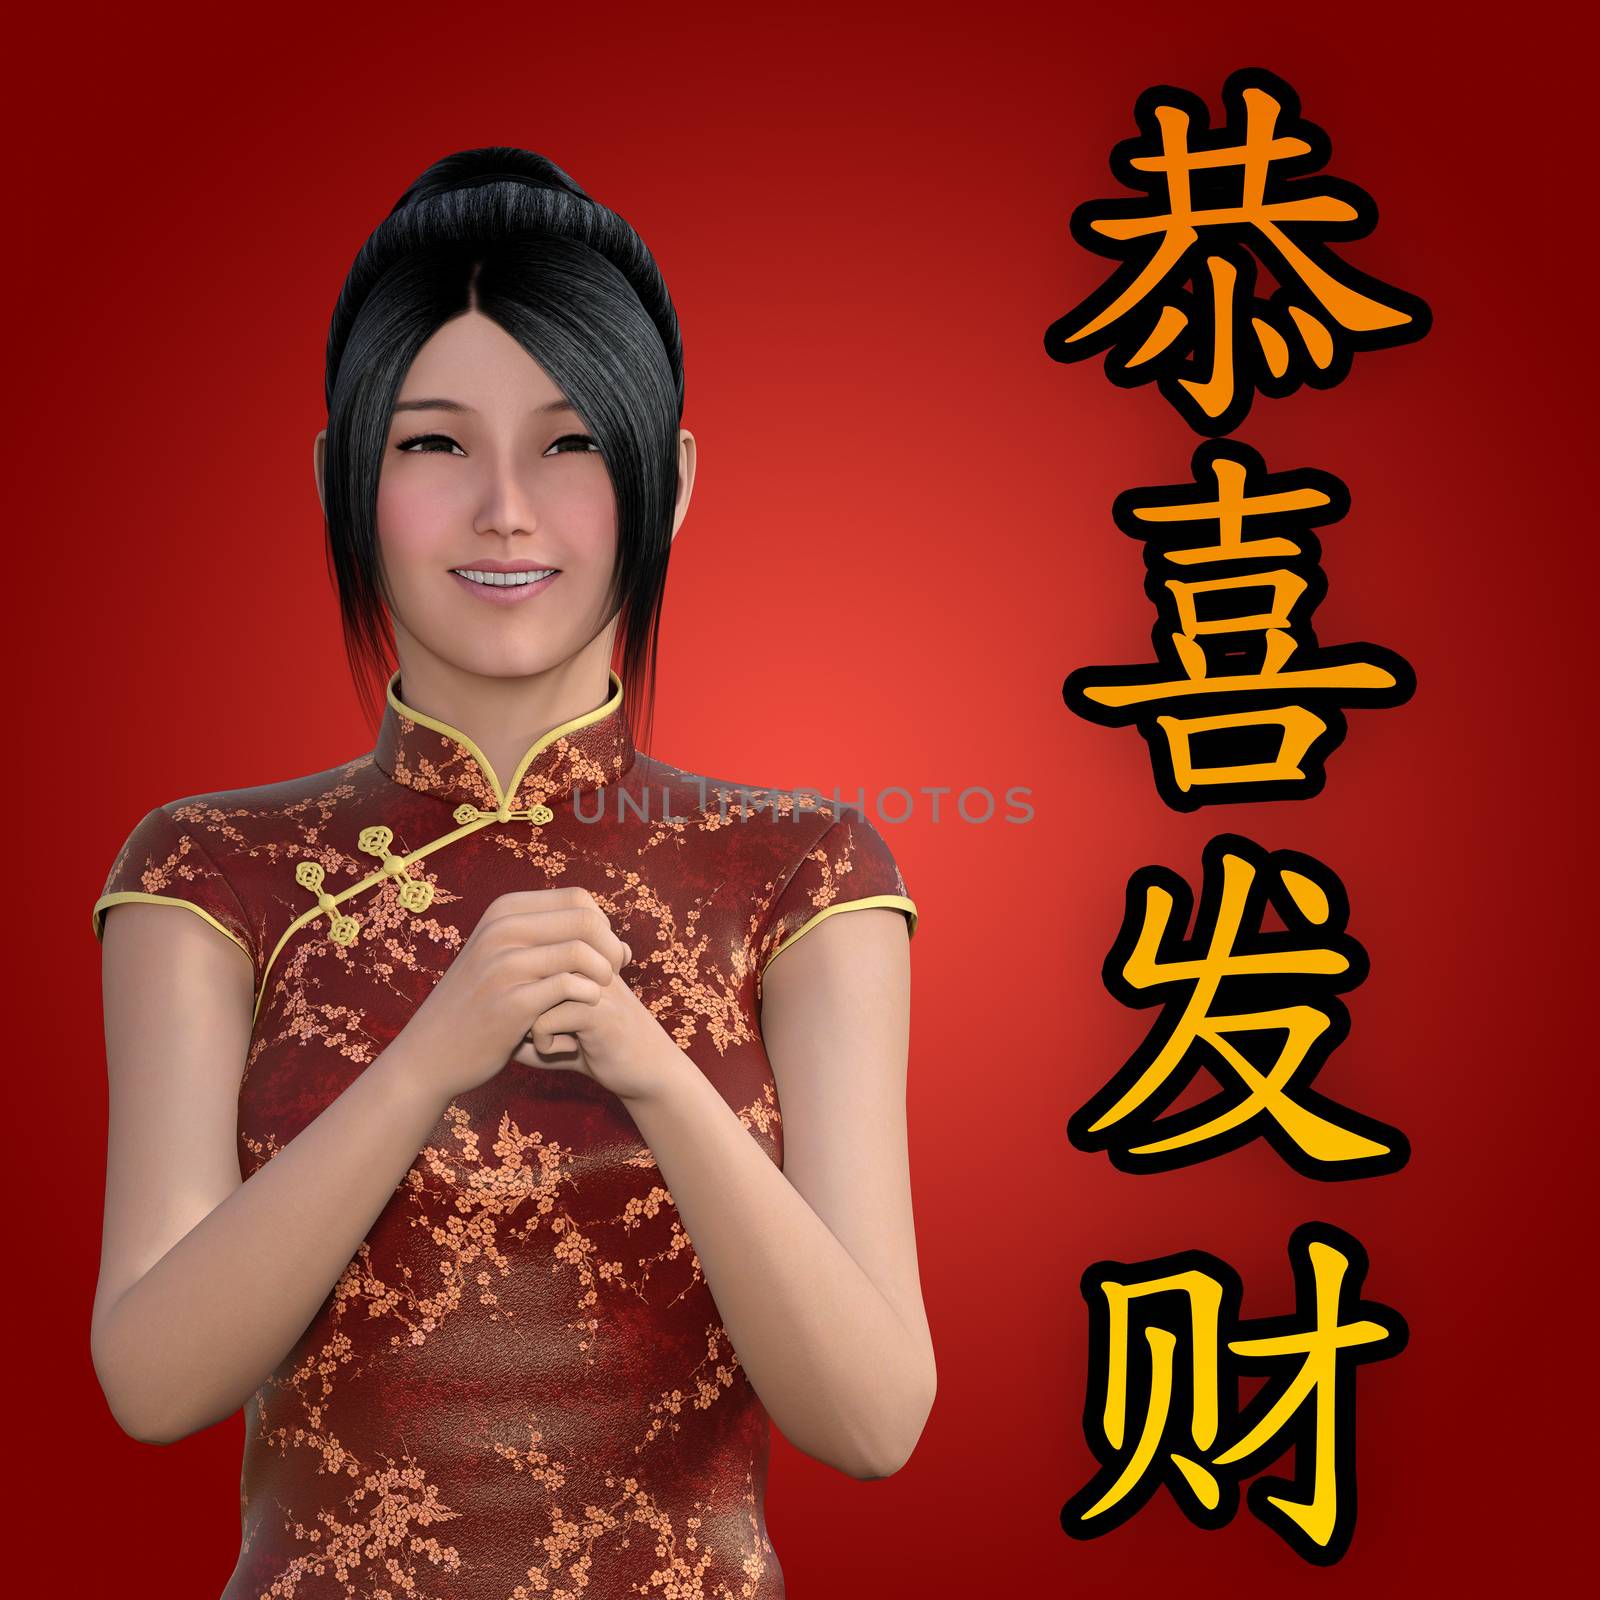 Happy Chinese New Year with Greetings From a Woman